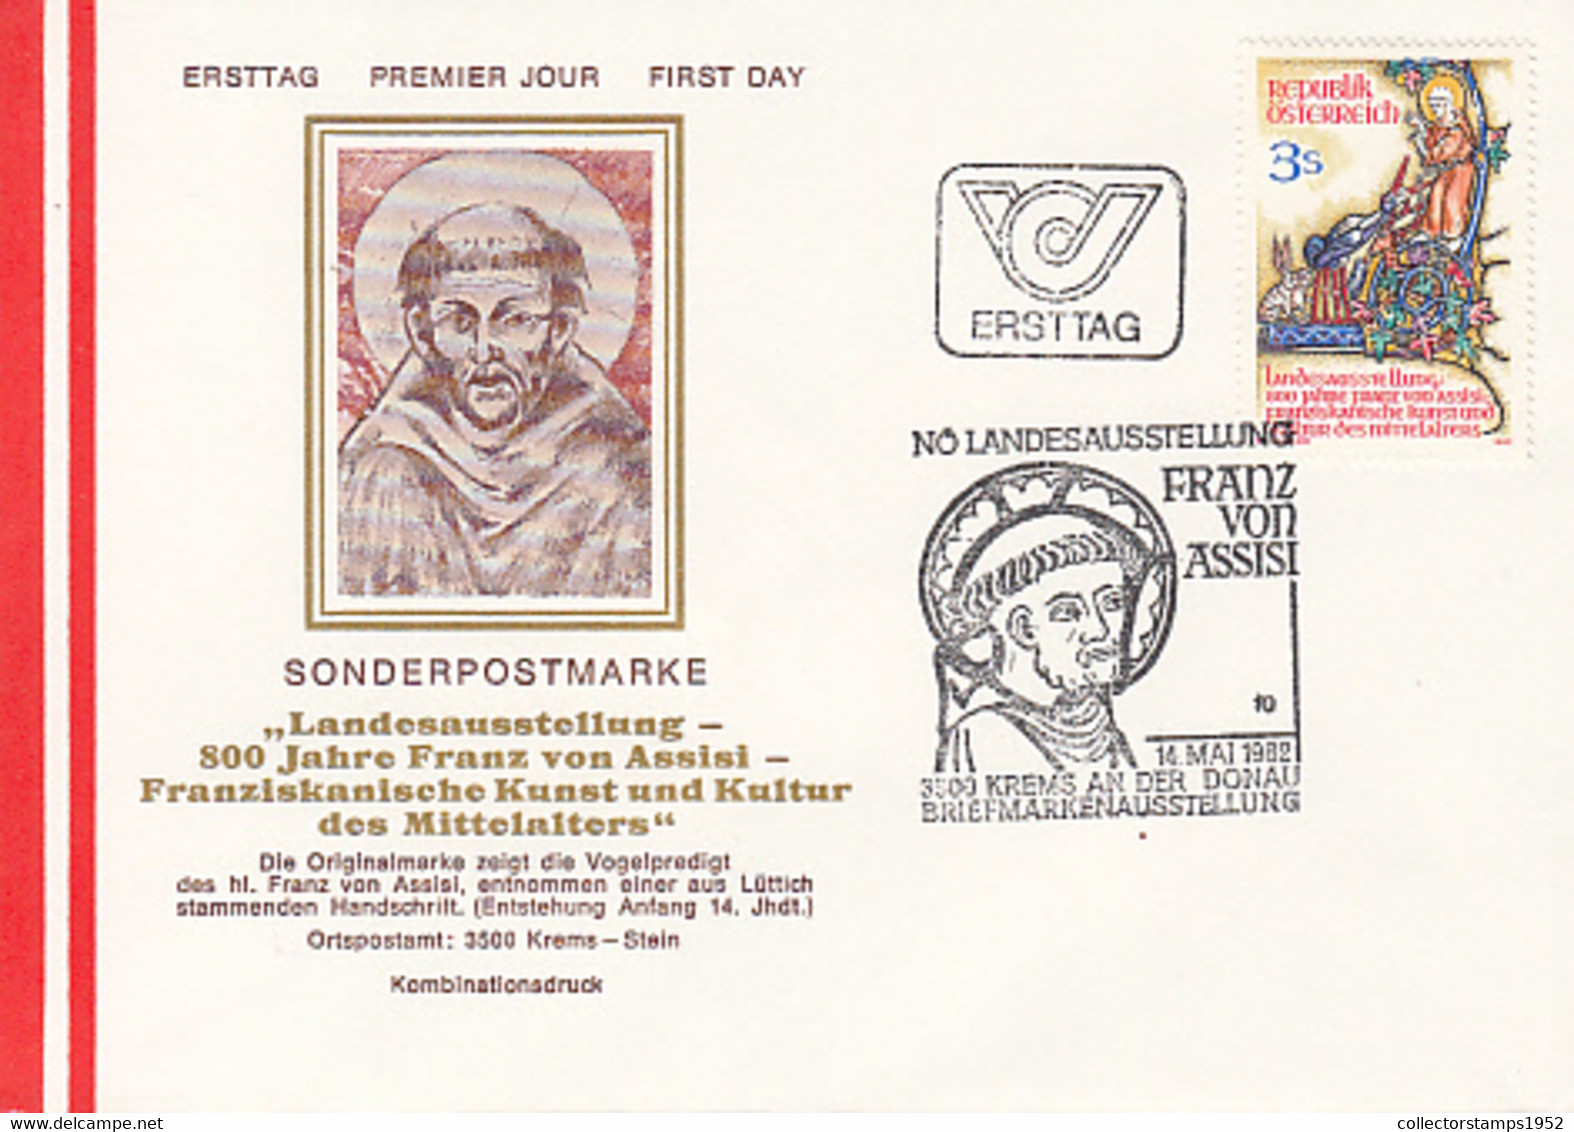 RELIGION, THEOLOGIANS, ST FRANCIS OF ASSISI, COVER FDC, 1982, AUSTRIA - Theologians